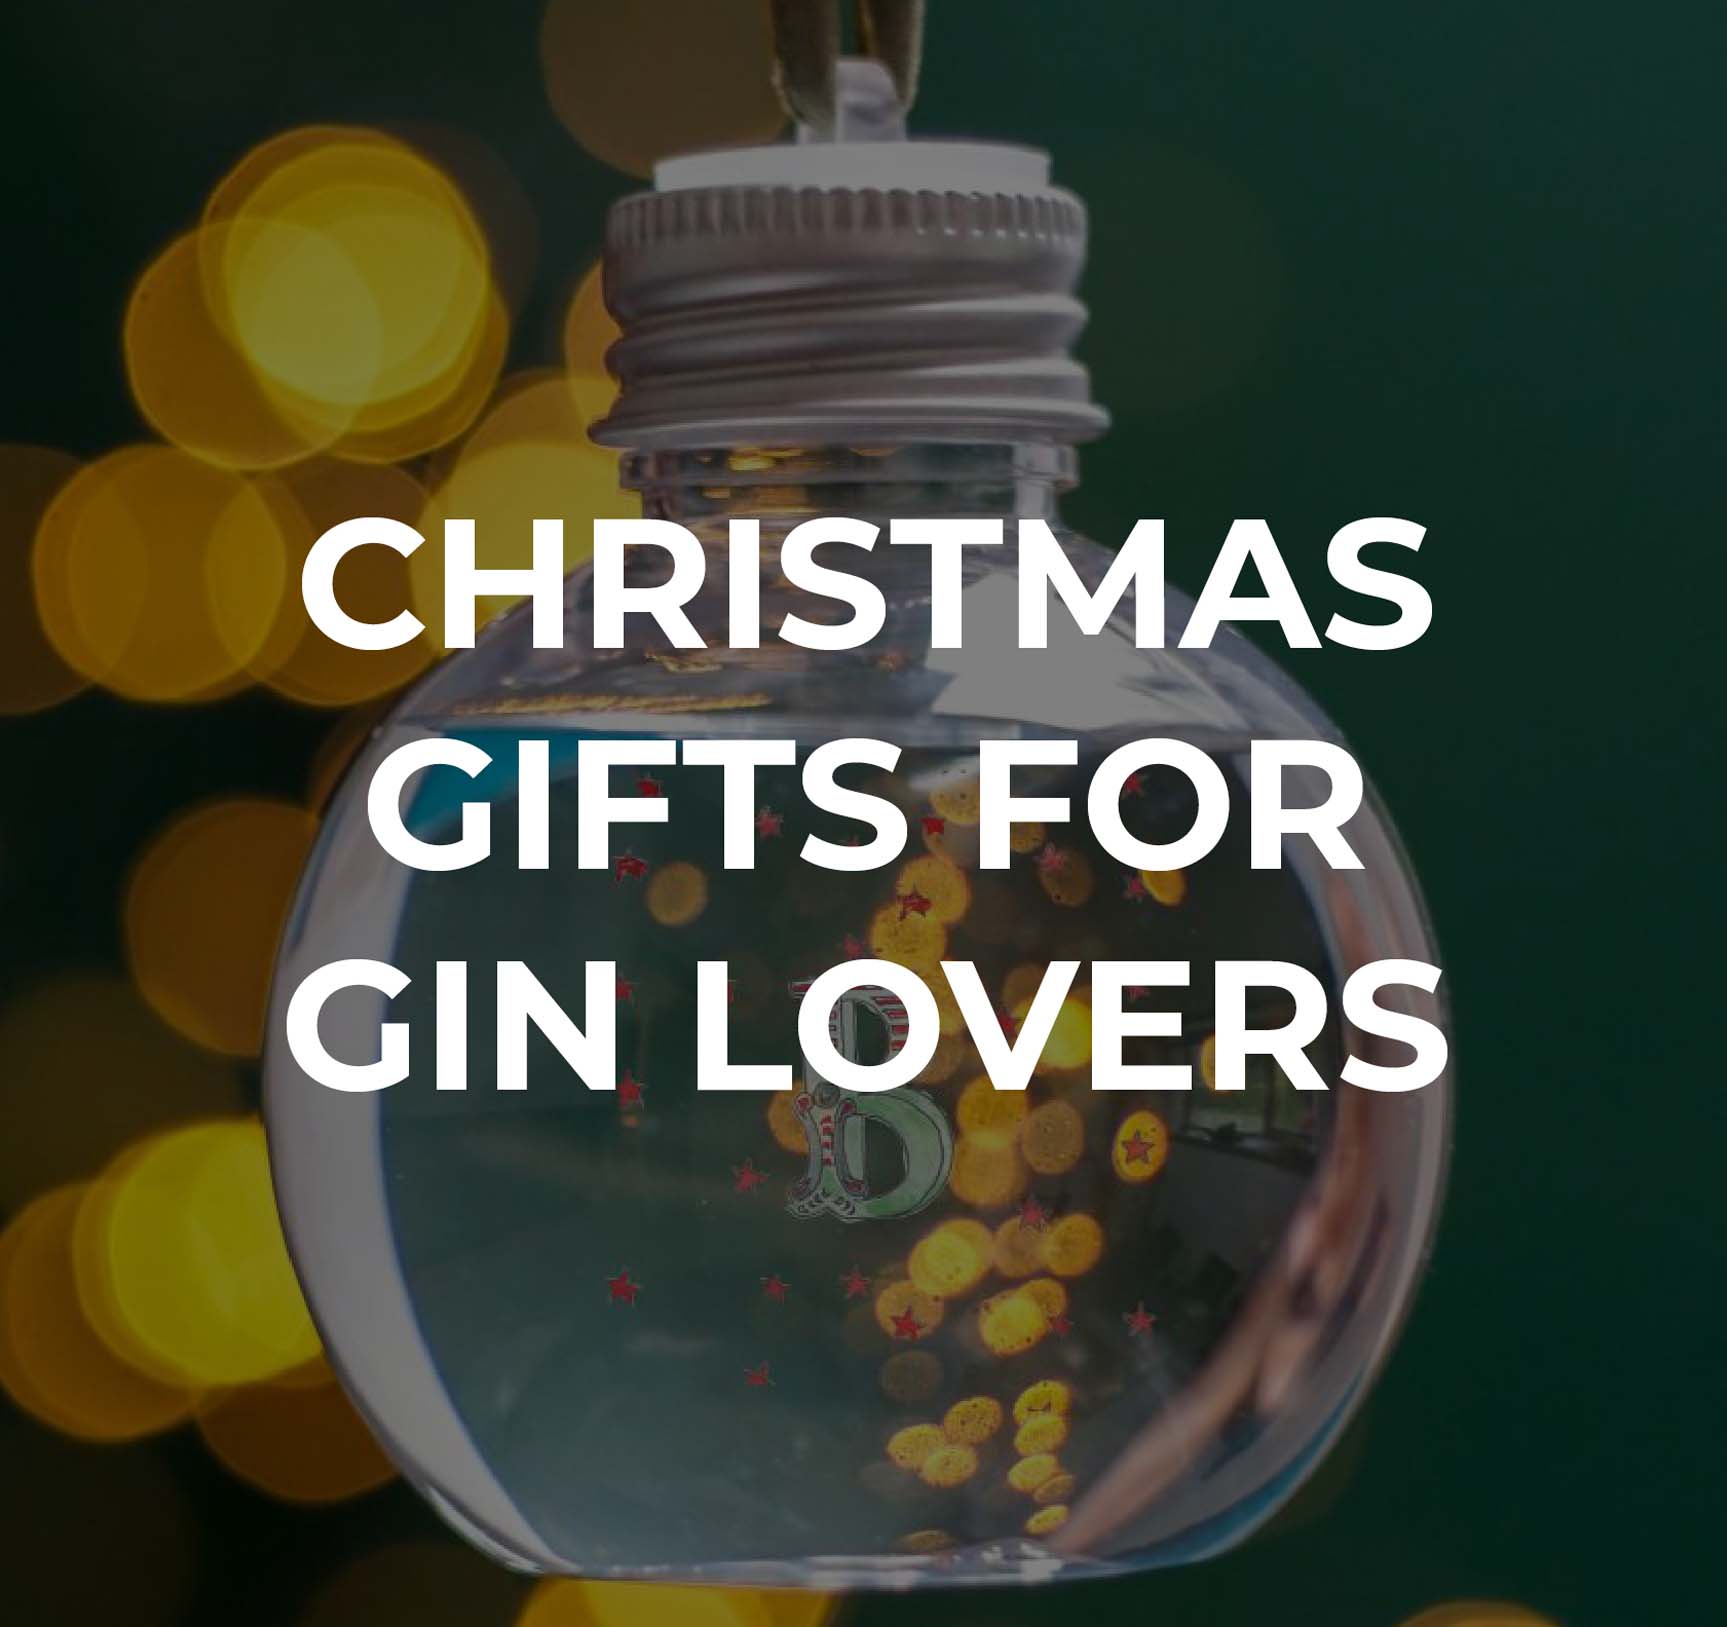 Christmas gifts for Gin Lovers